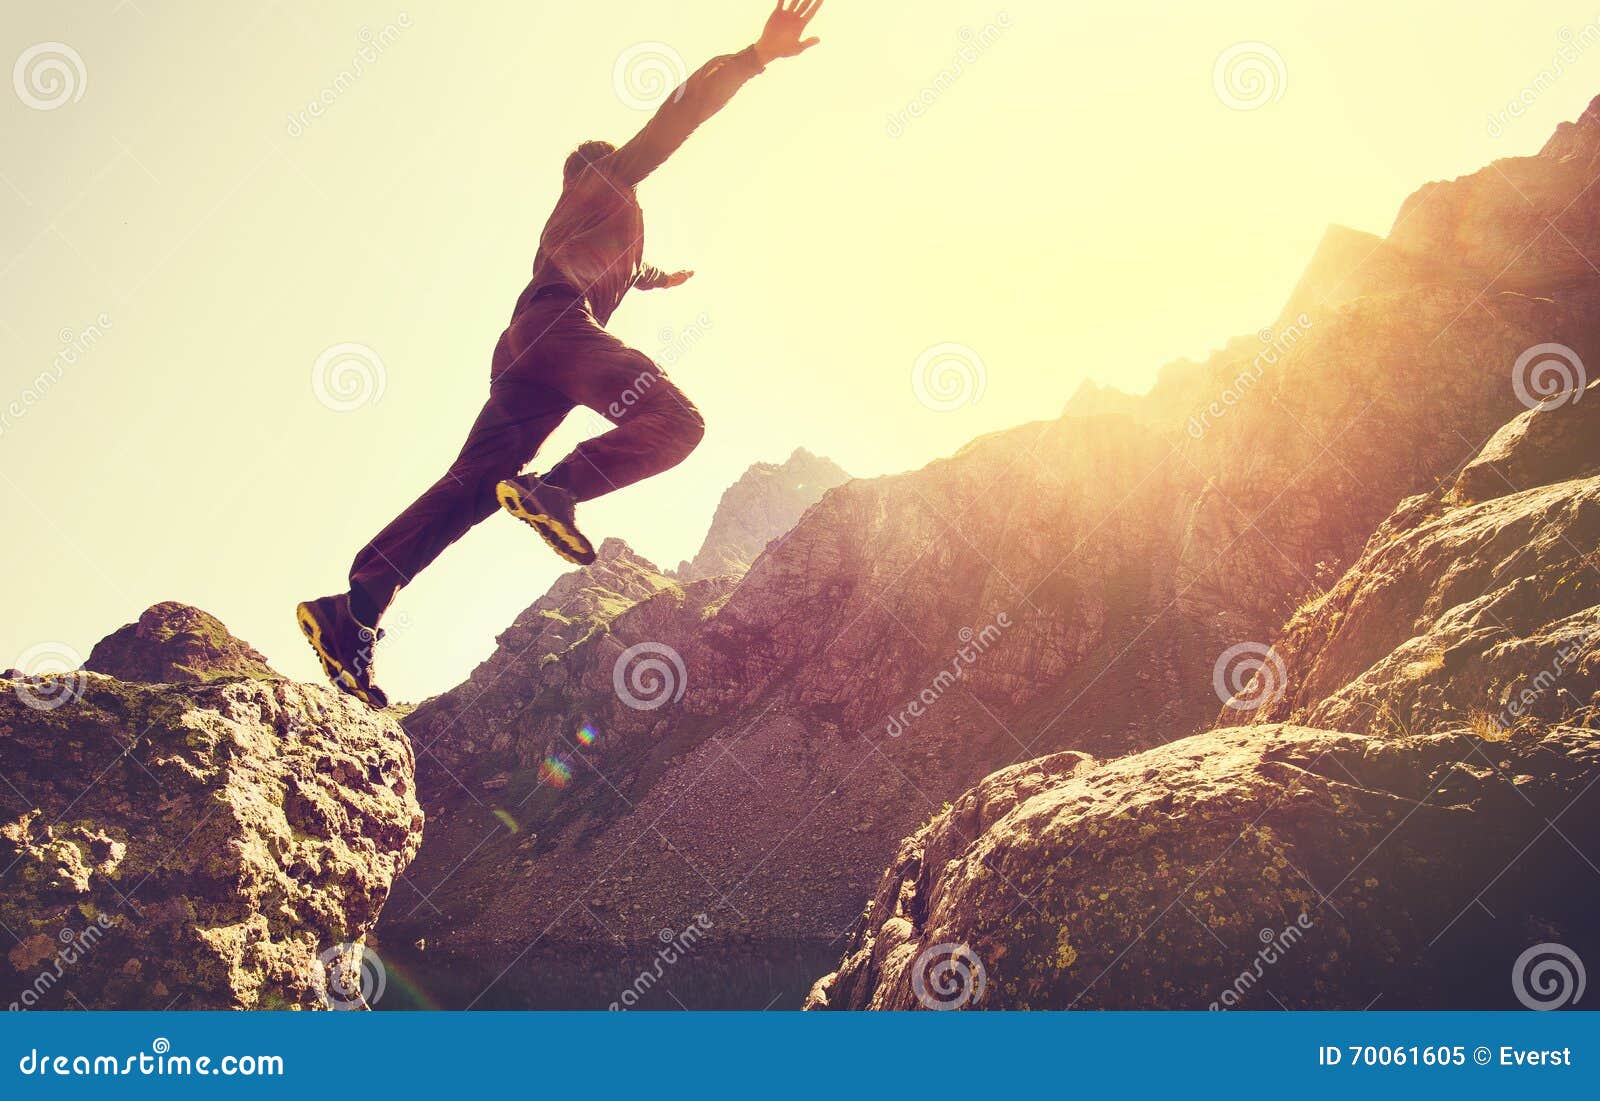 running man on mountains jumping cliff over lake